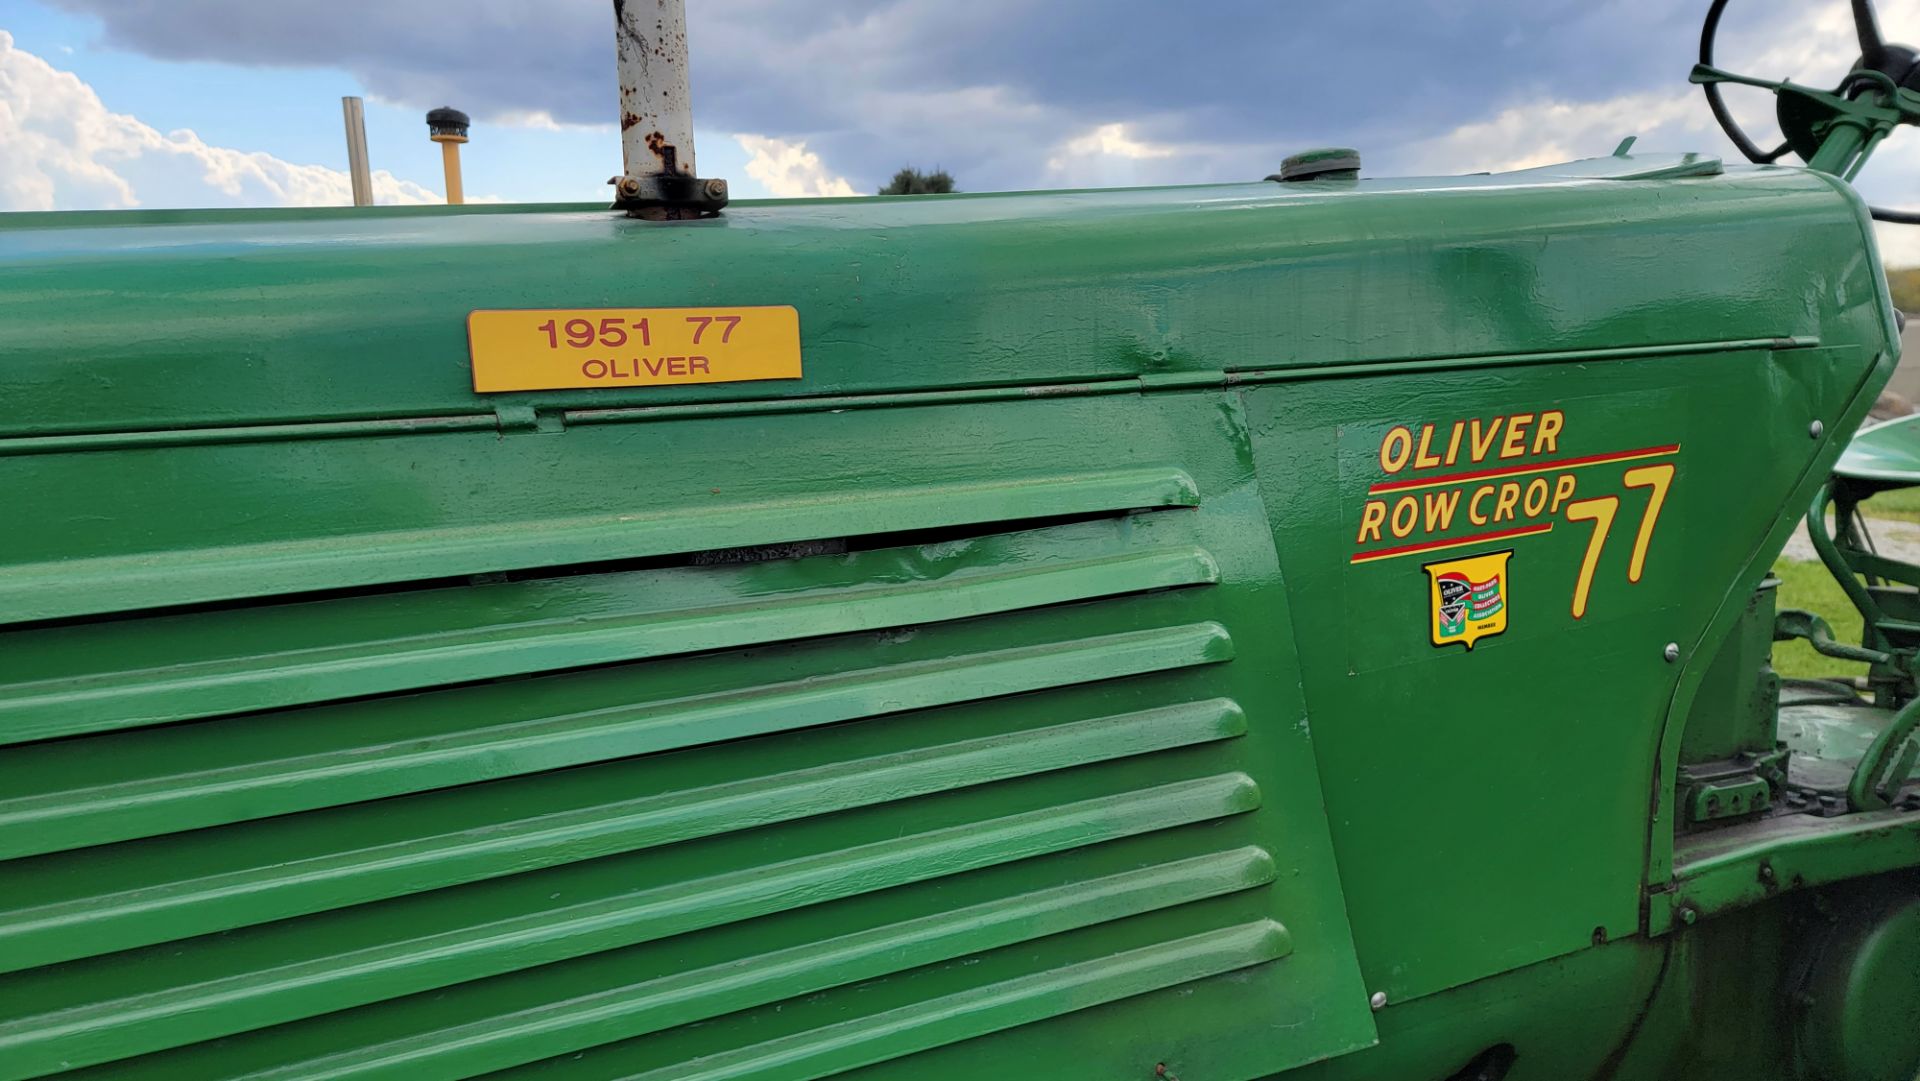 1951 Oliver 77 Row Crop Tractor, 6 Cylinder Gasoline Engine, Rear Hydraulics, Restored - Image 4 of 12